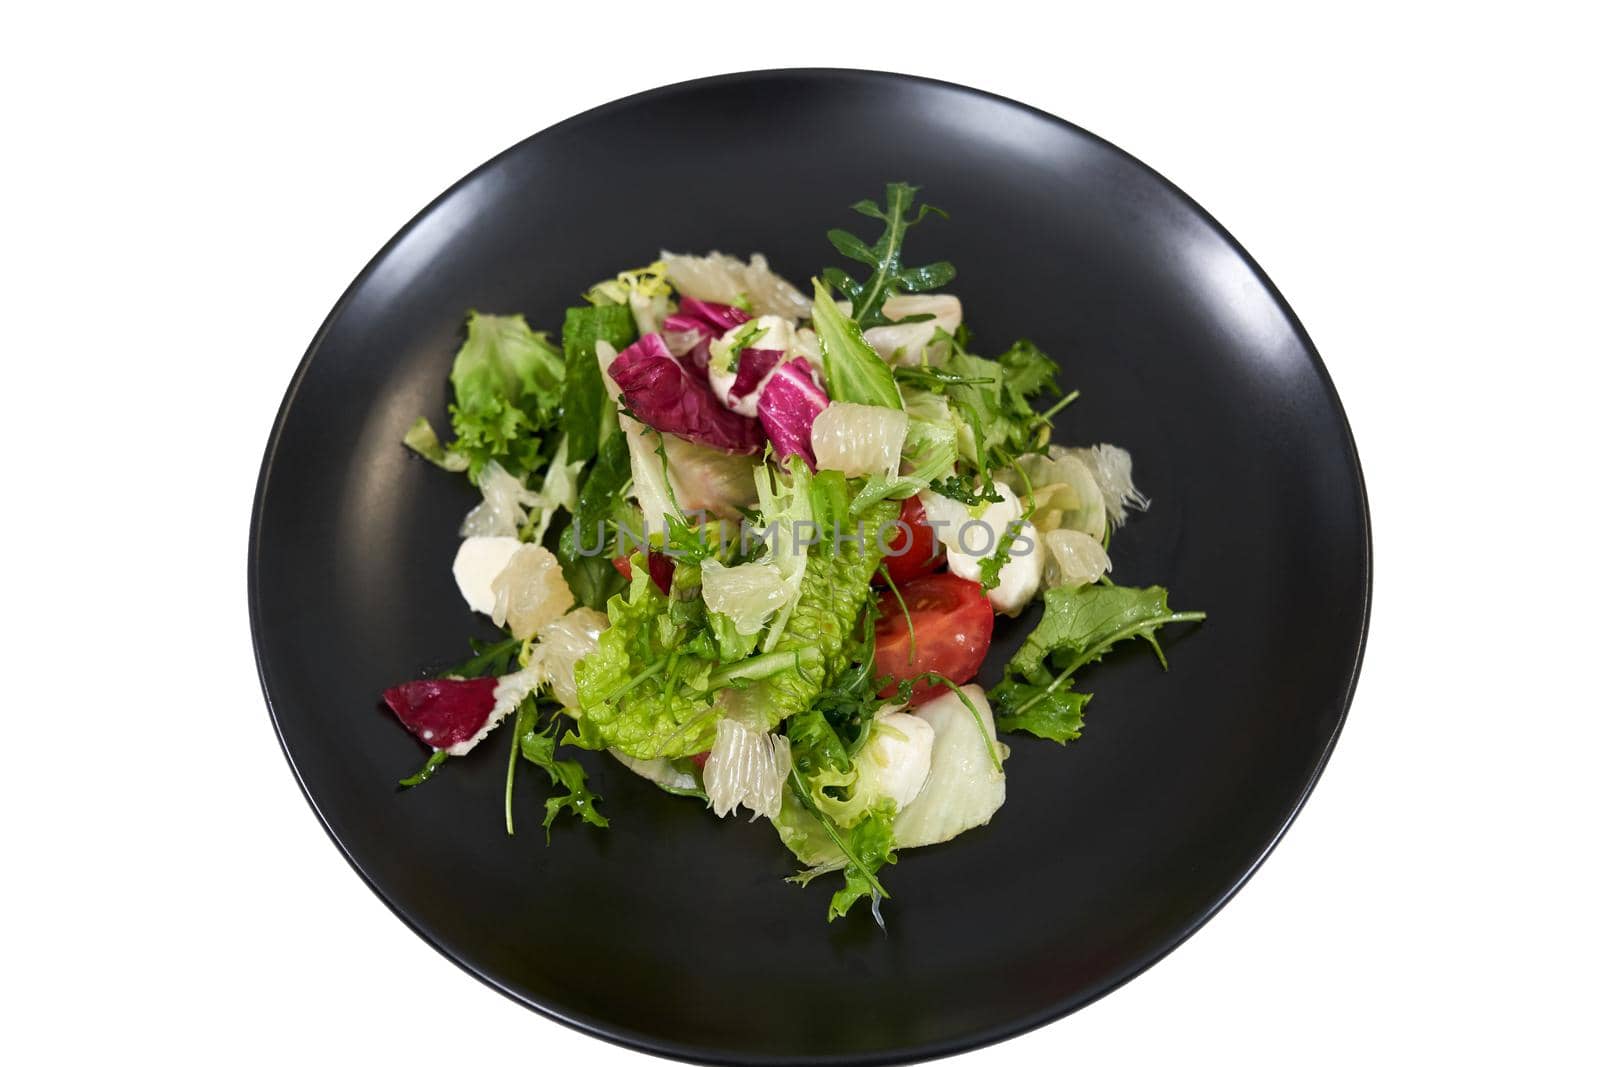 Top view close up mix fresh lettuce leaves different colors in black modern plate on white background. Concept of juicy salad with fresh vegetables for maintain body weight.